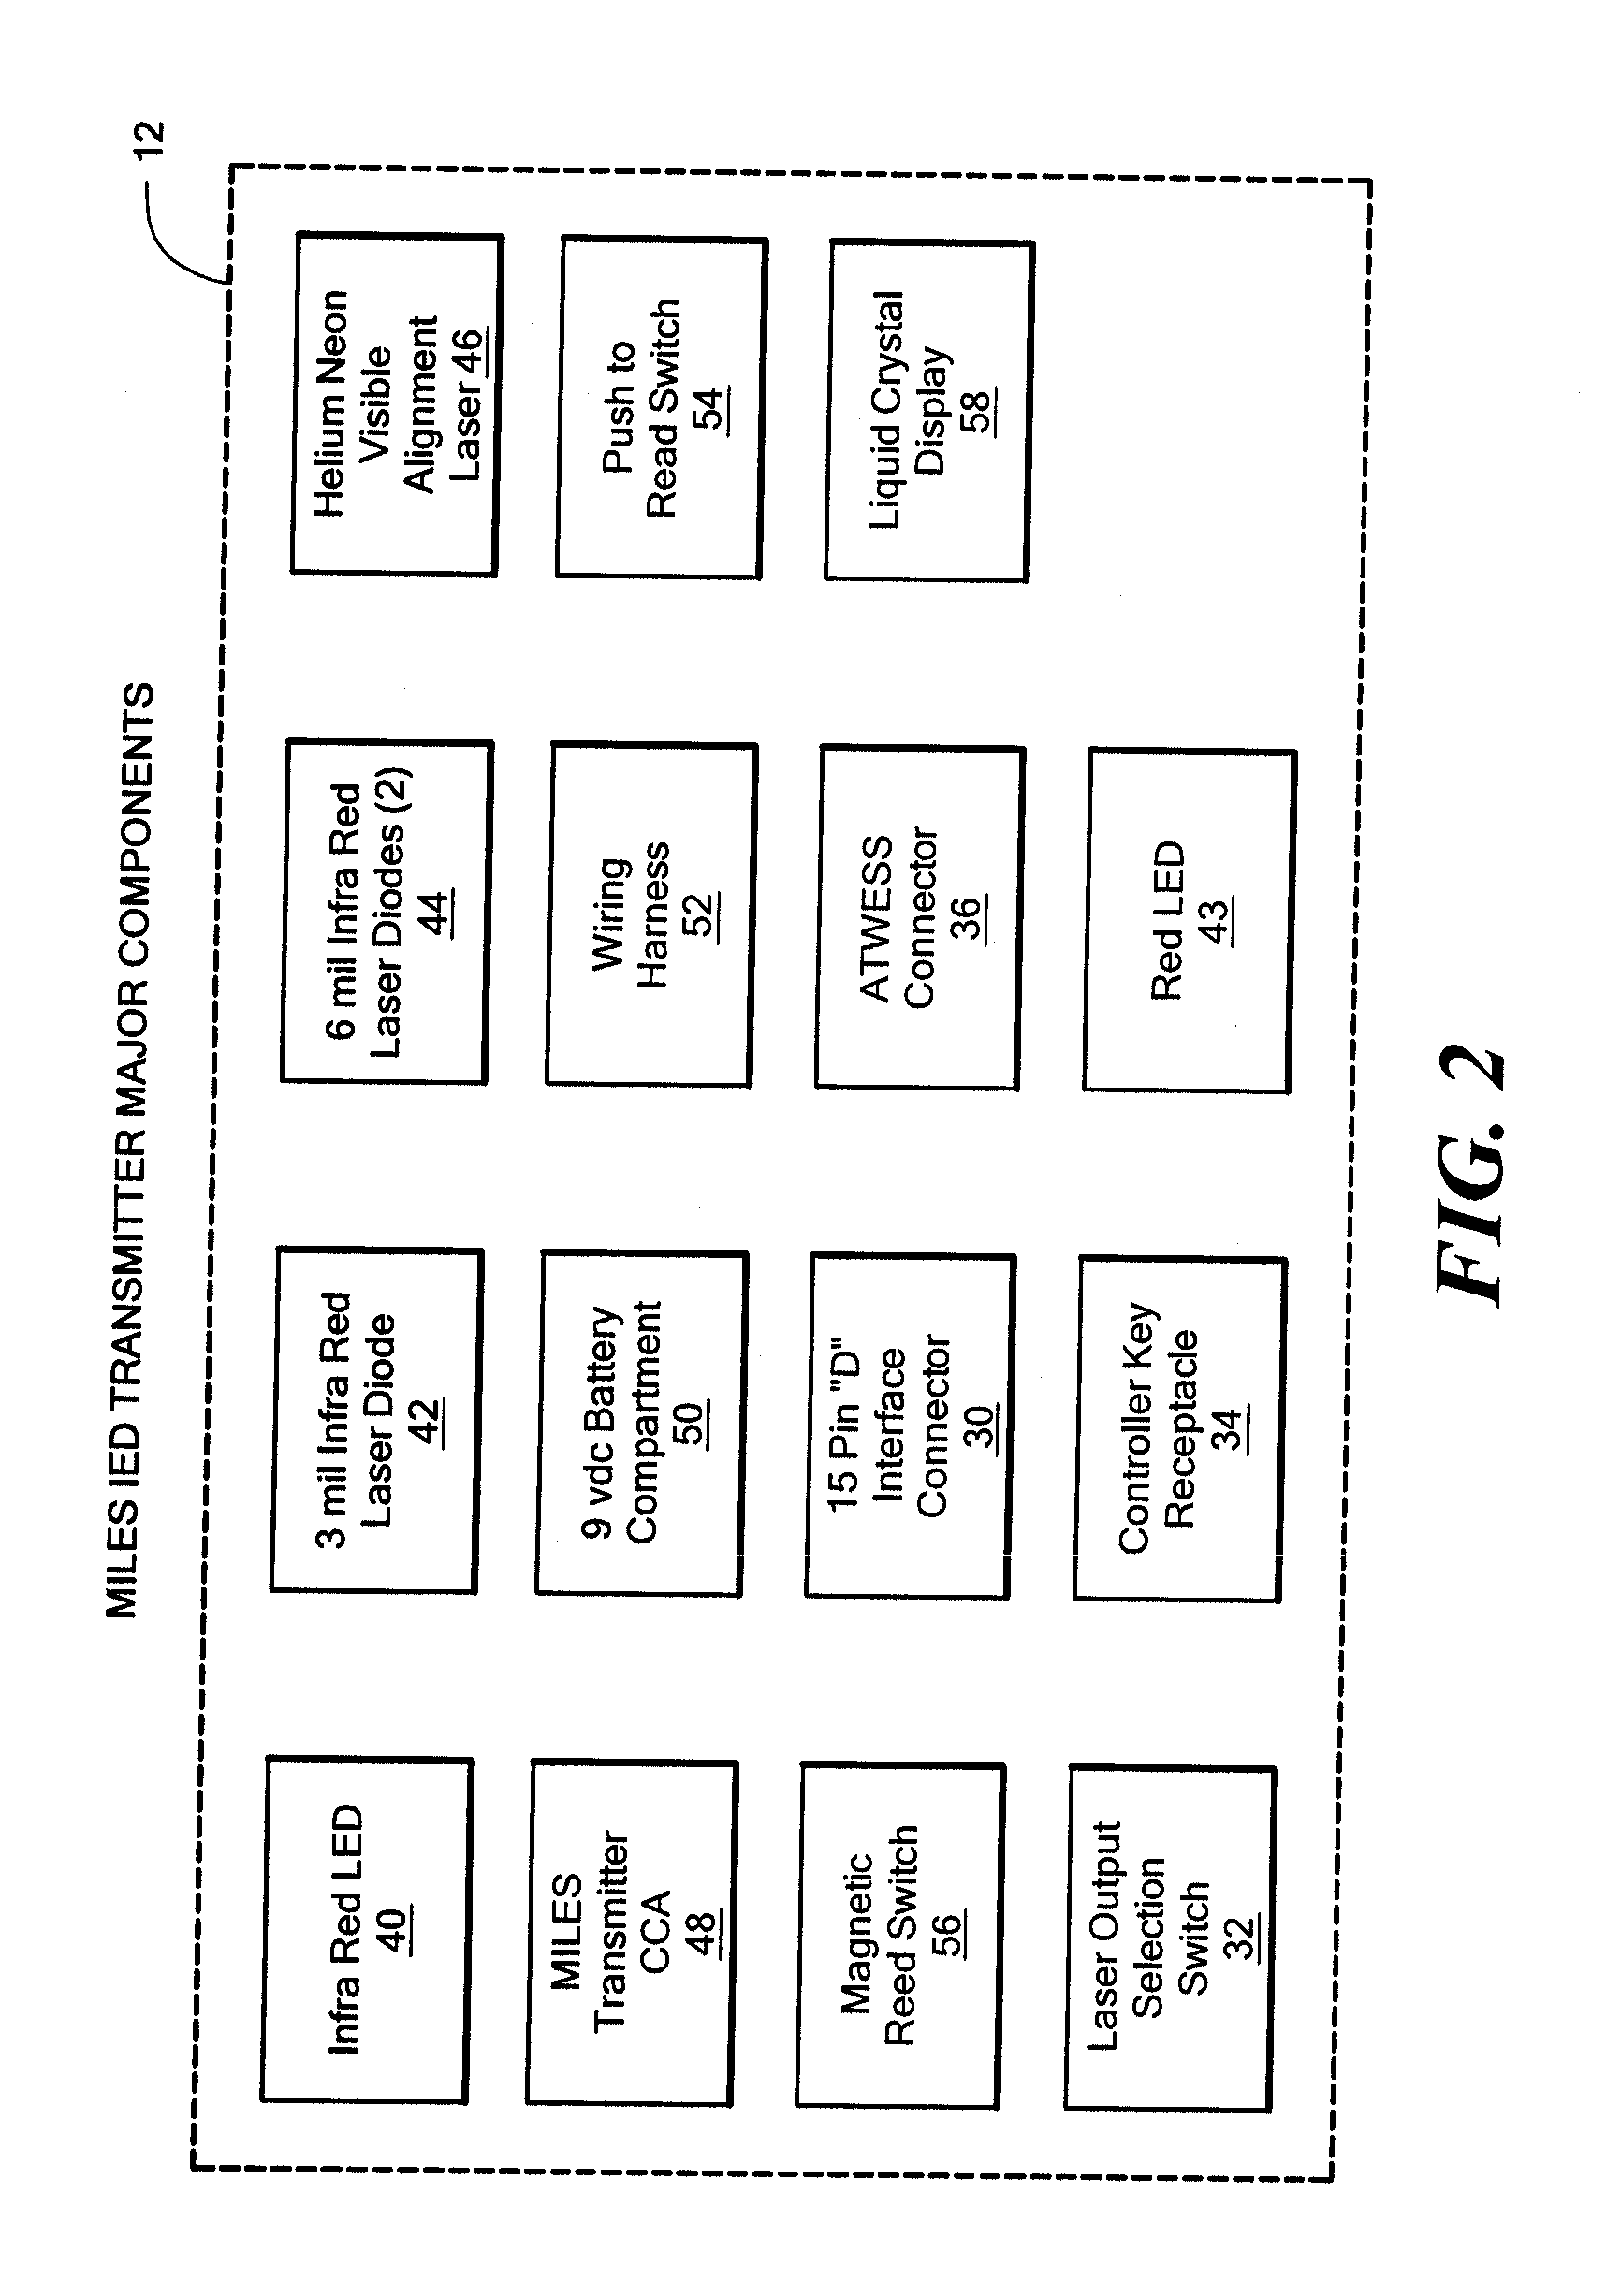 Methods and apparatus to provide training against improvised explosive devices